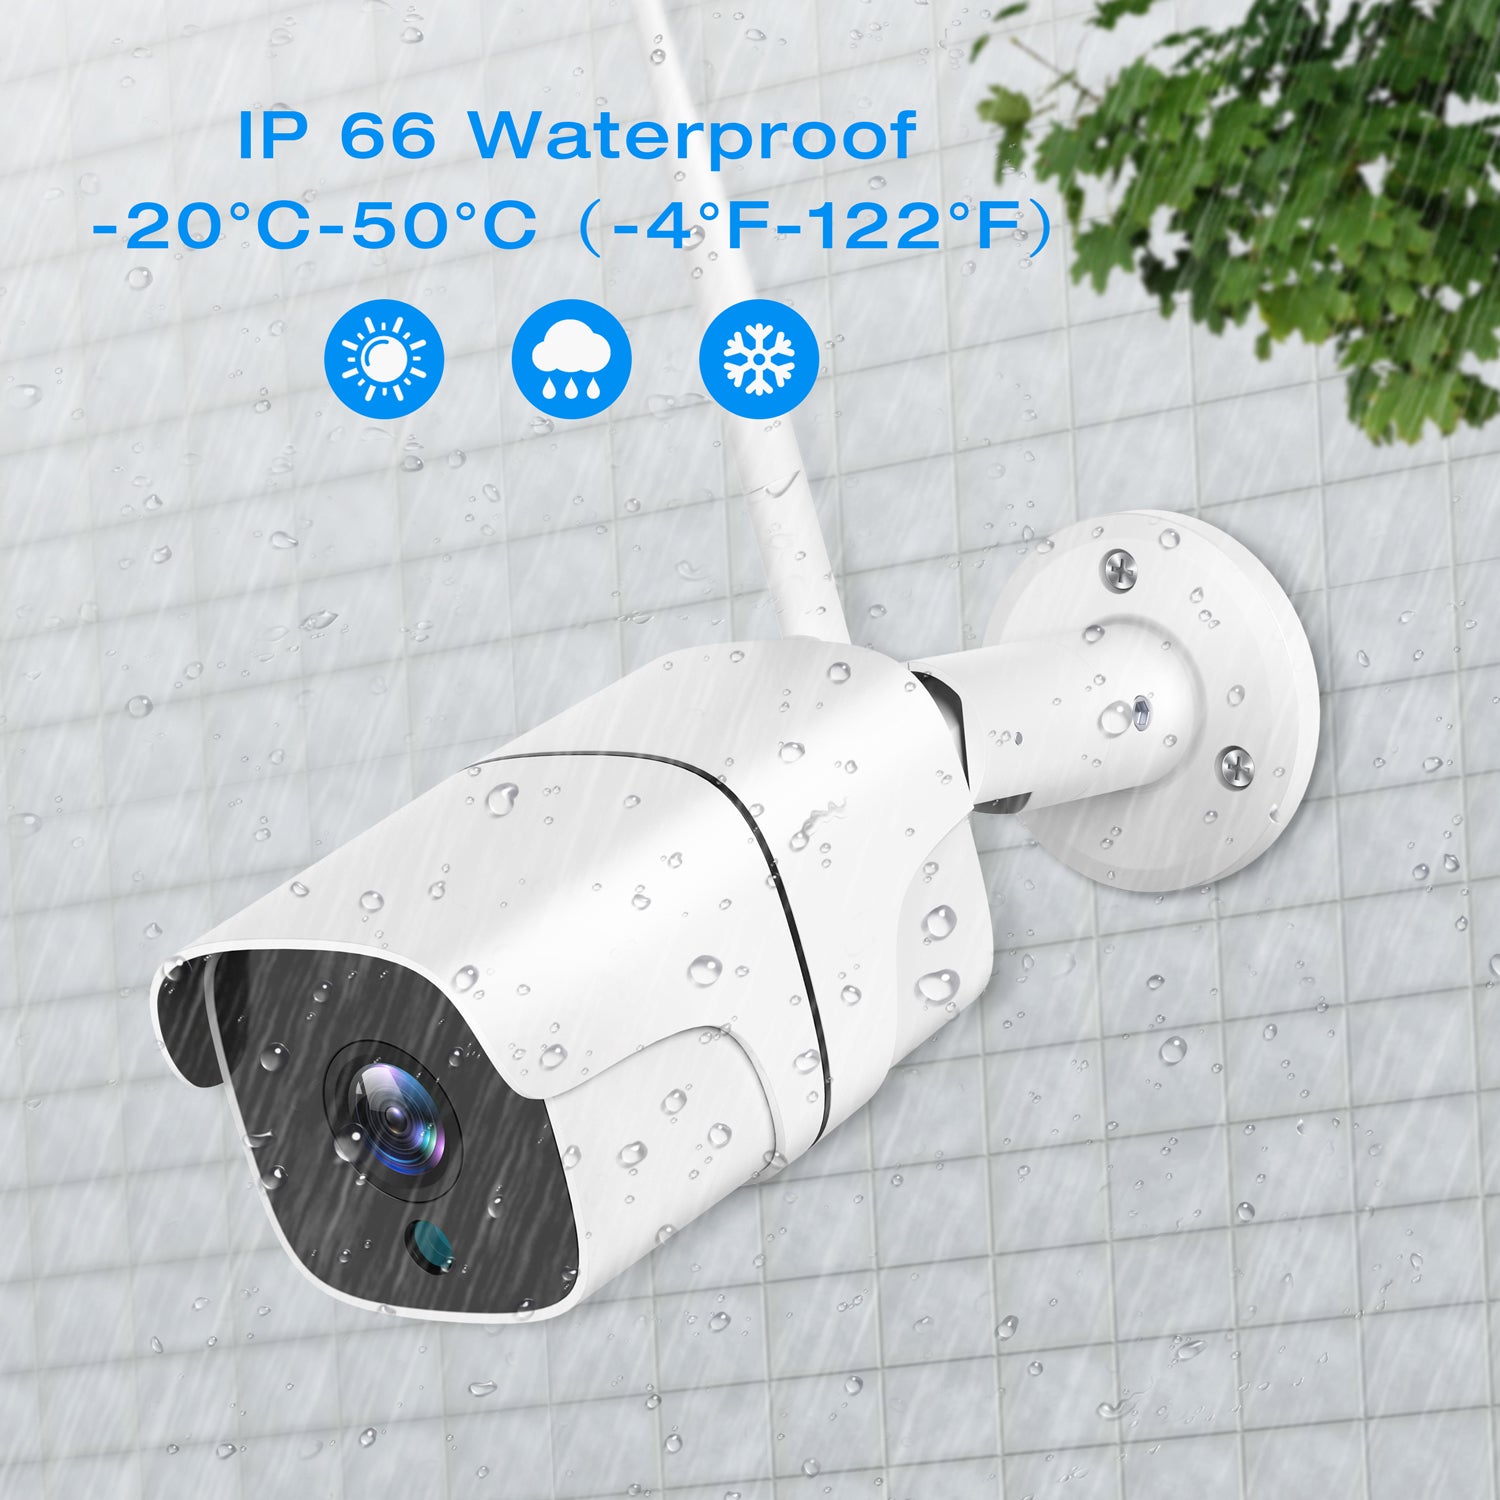 A Single Security Camera For Toguard W300/W400 Security System（Out of stock in Canada, Australia，Europe）